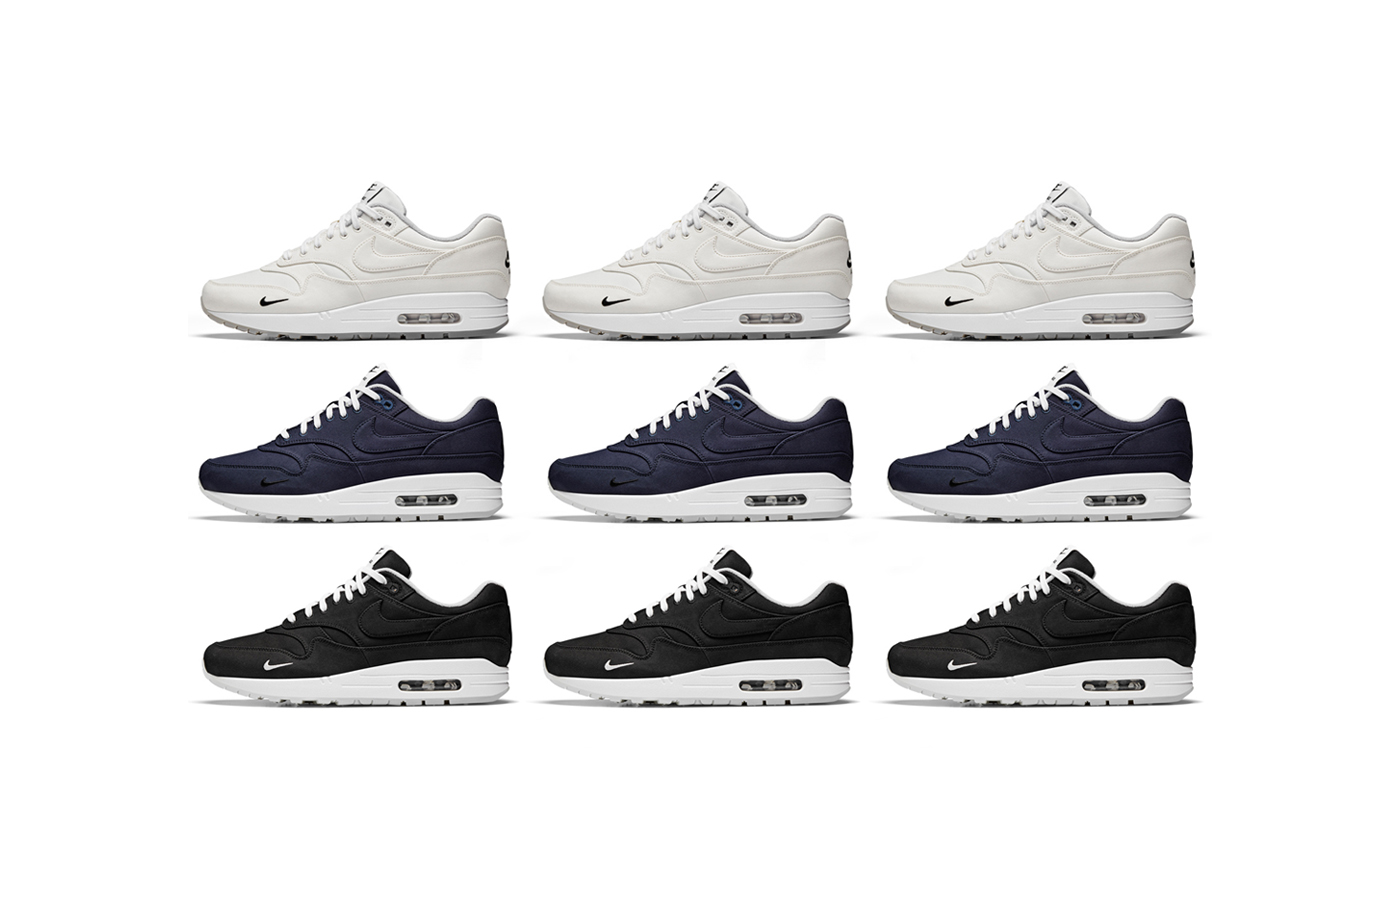 NikeLab x Dover Street Market Air Max 1 Ventile : Release Date